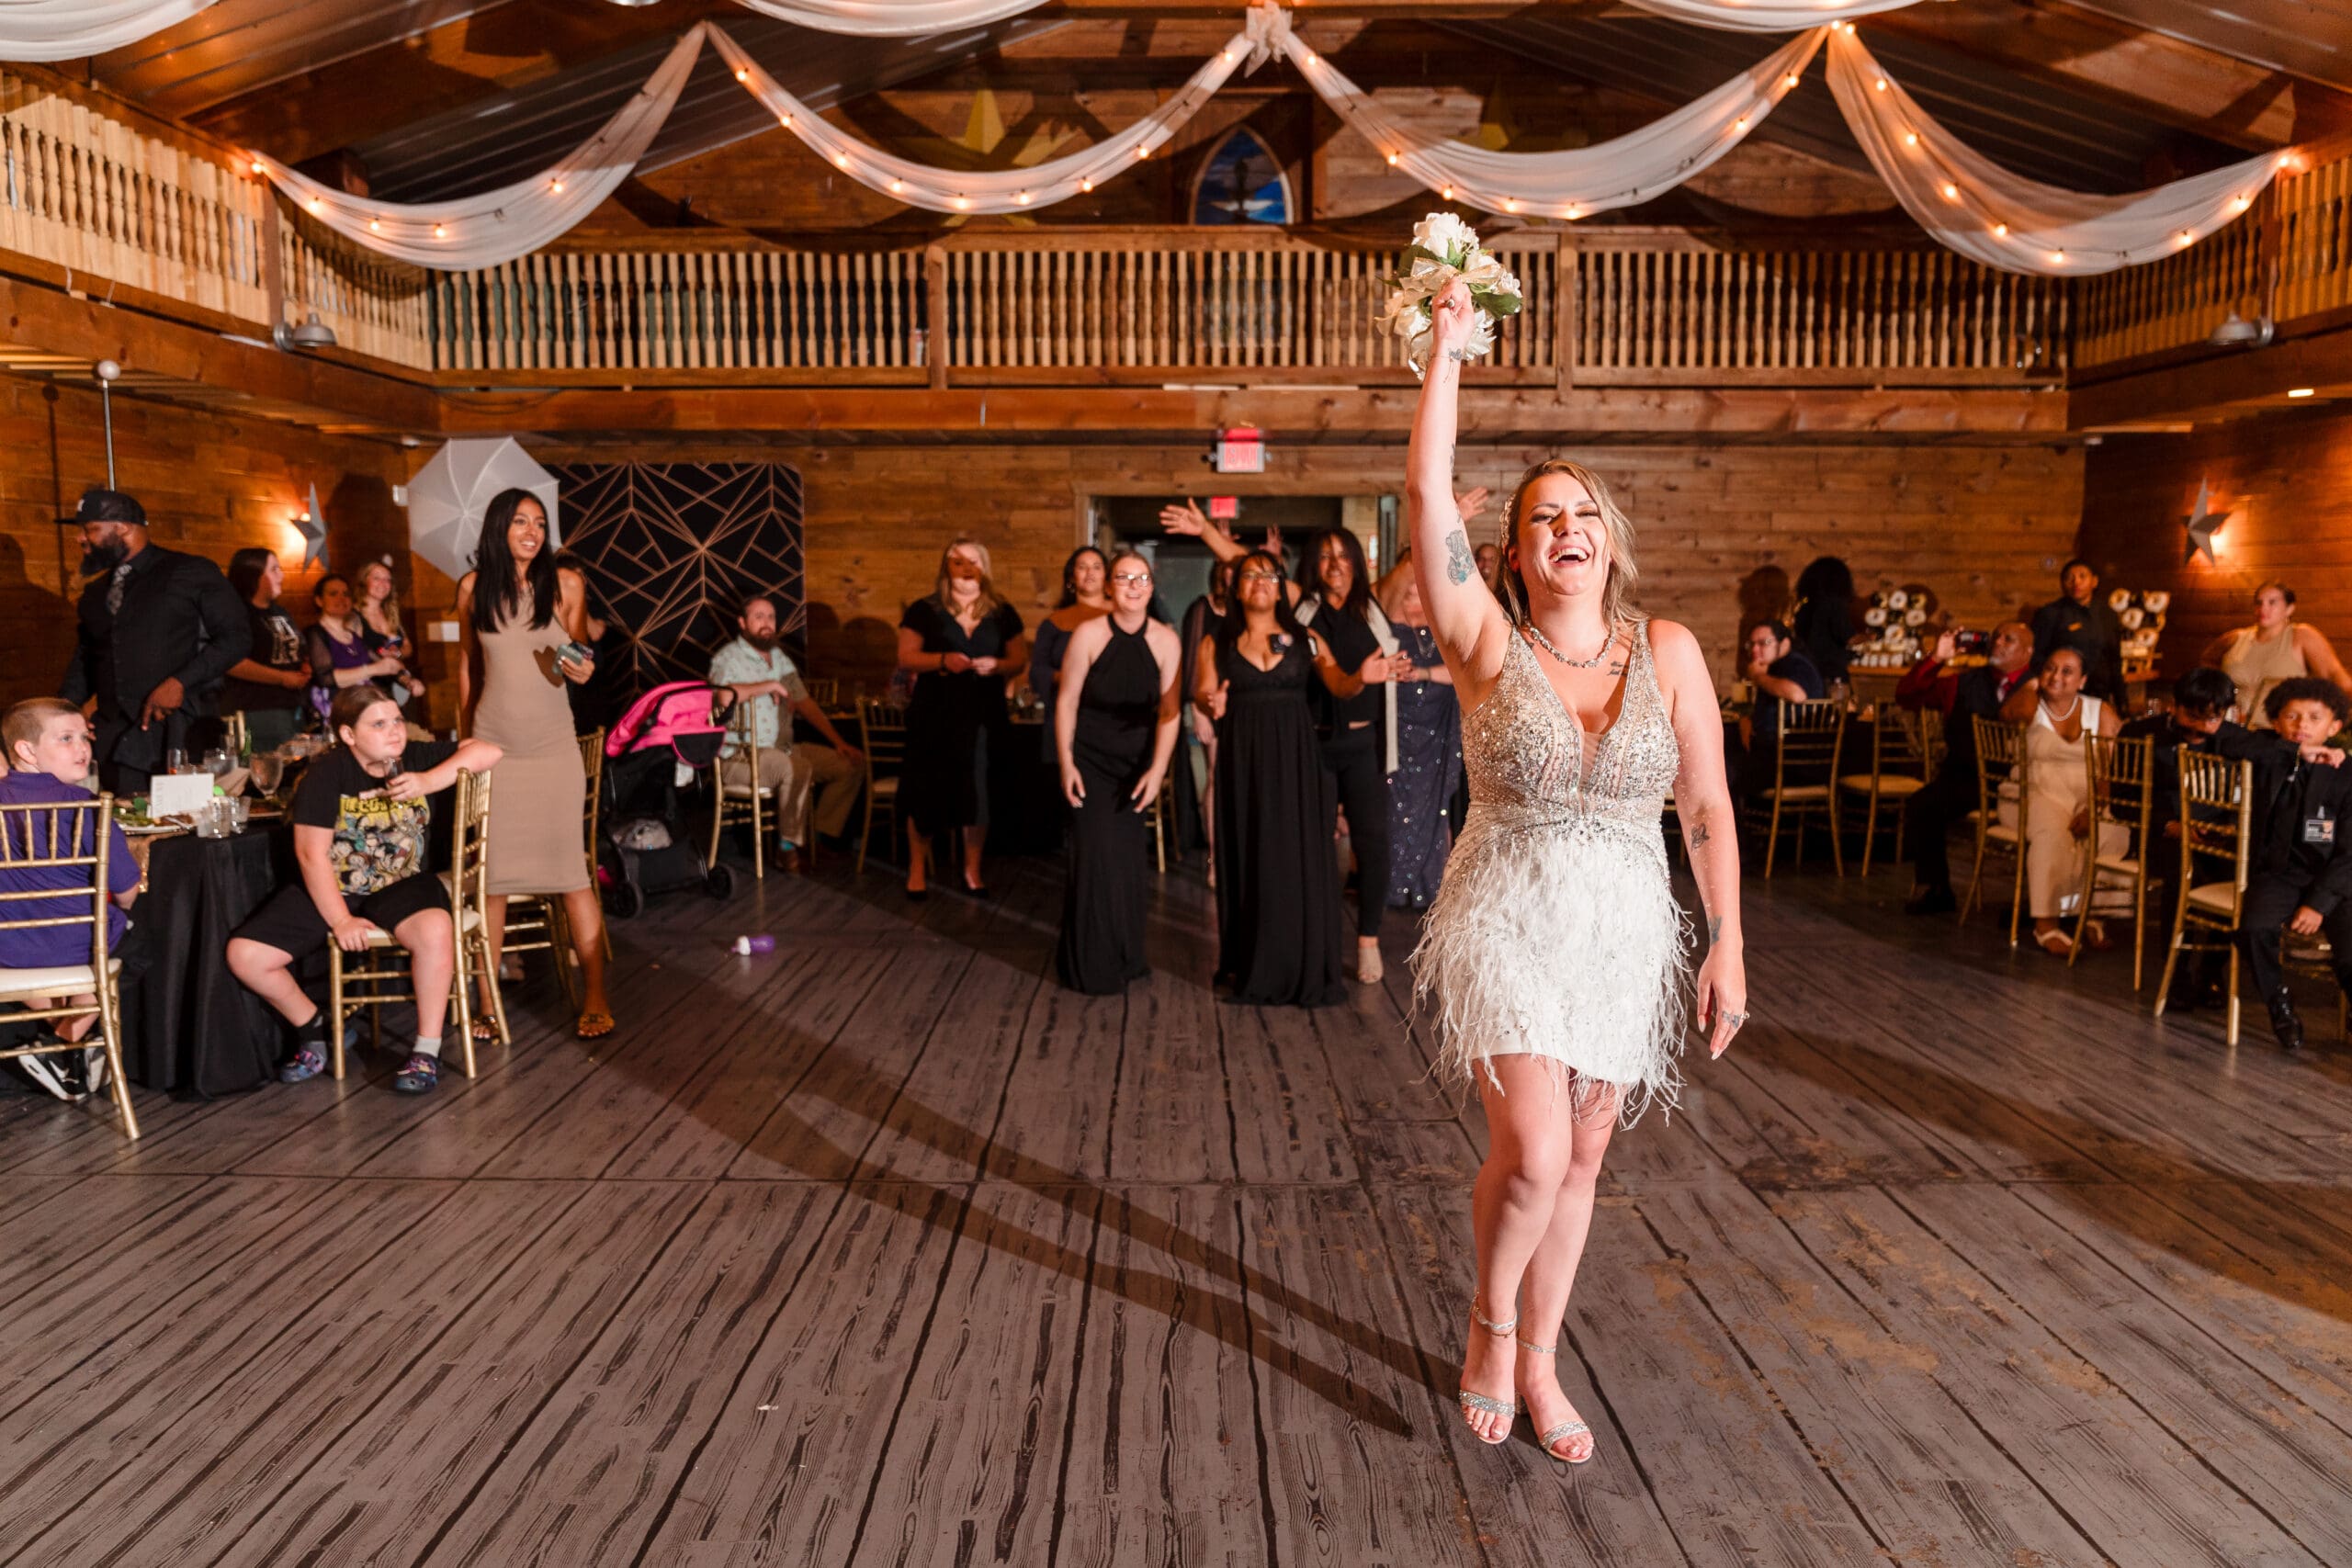 Taylor tossing her bouquet over her back towards bridesmaids and guests in the Hidden Barn Celebration Area, Apopka